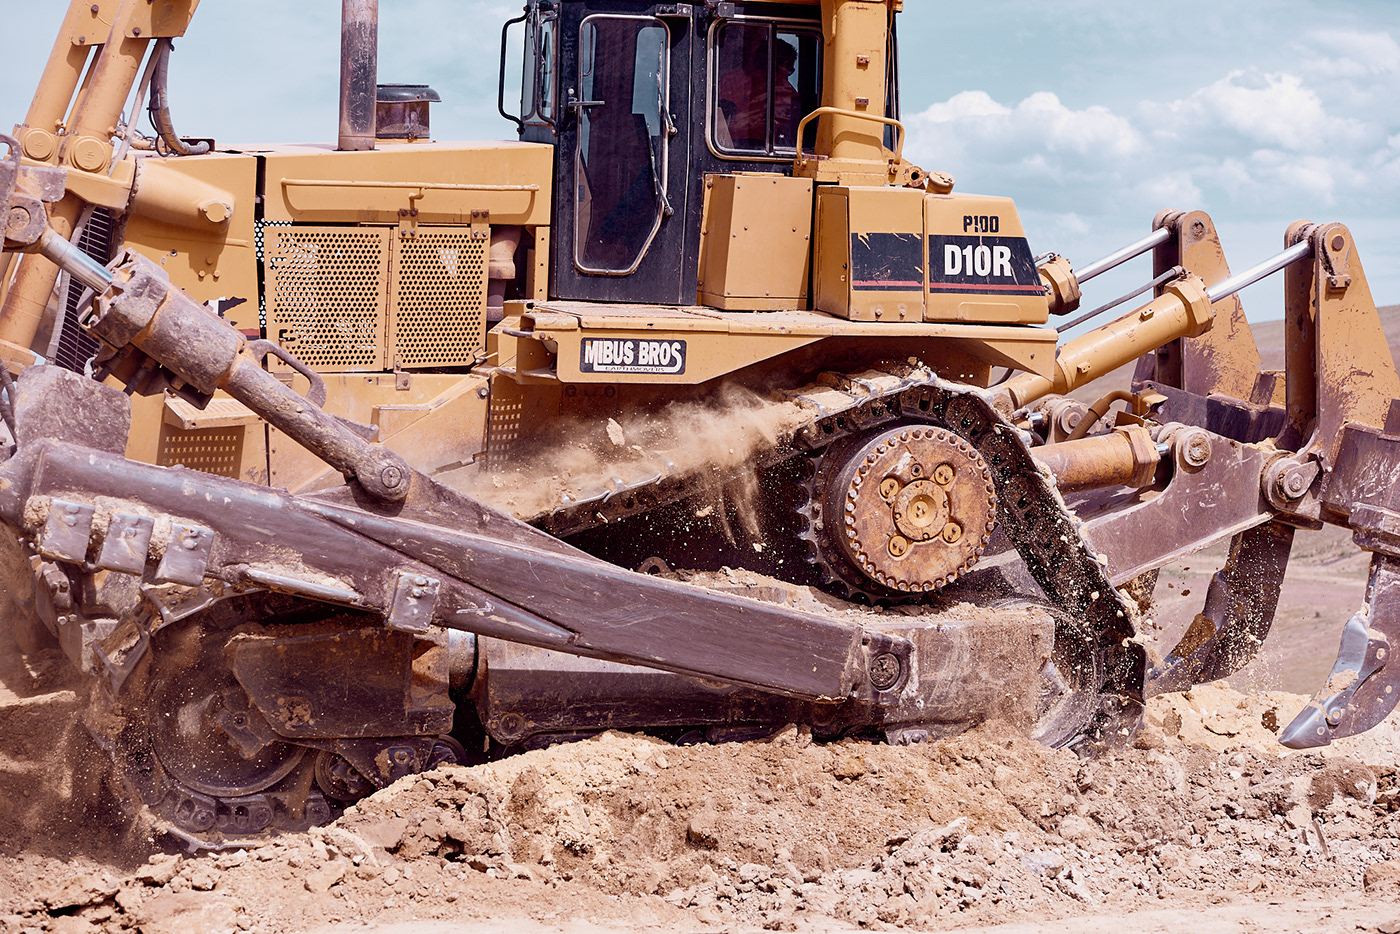 machinery Industrial Photography Earthmoving Heavy Equipment Caterpillar quarry Mining